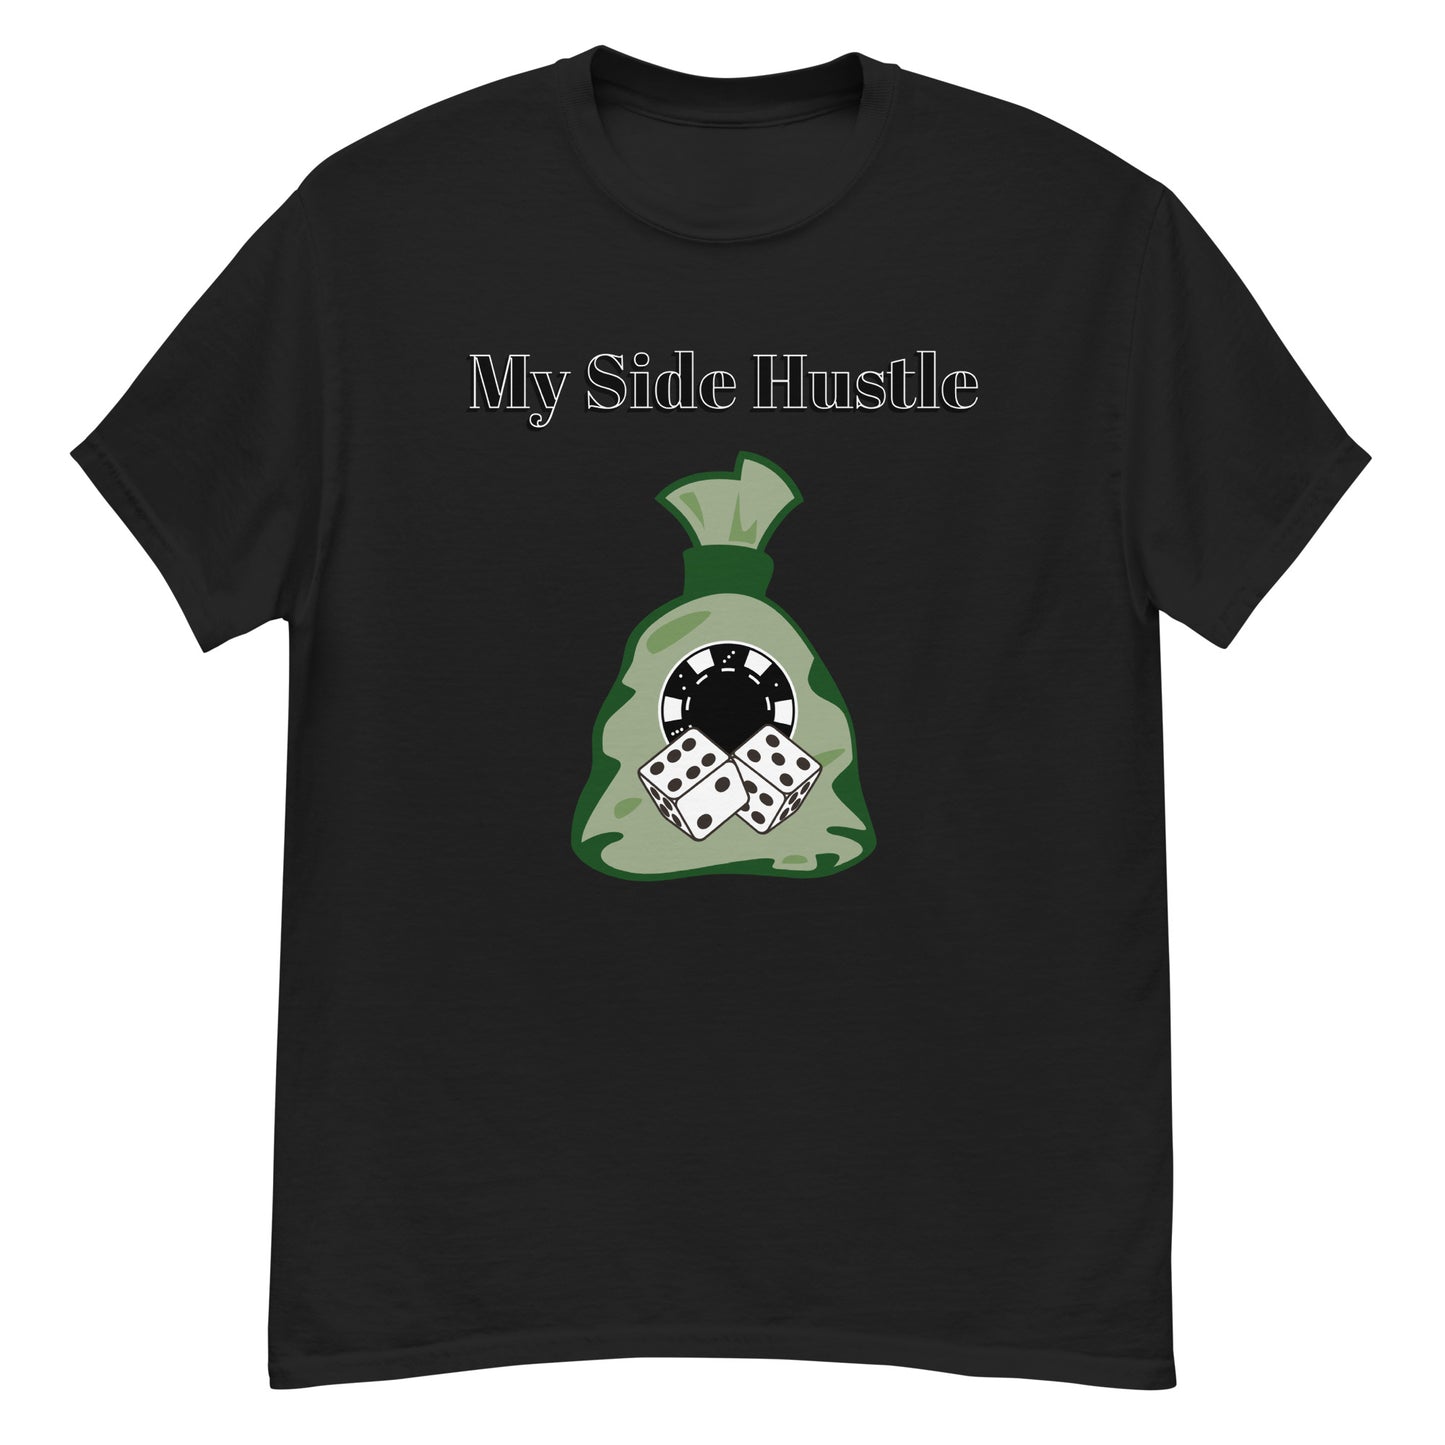 My side hustle craps and dice shirt